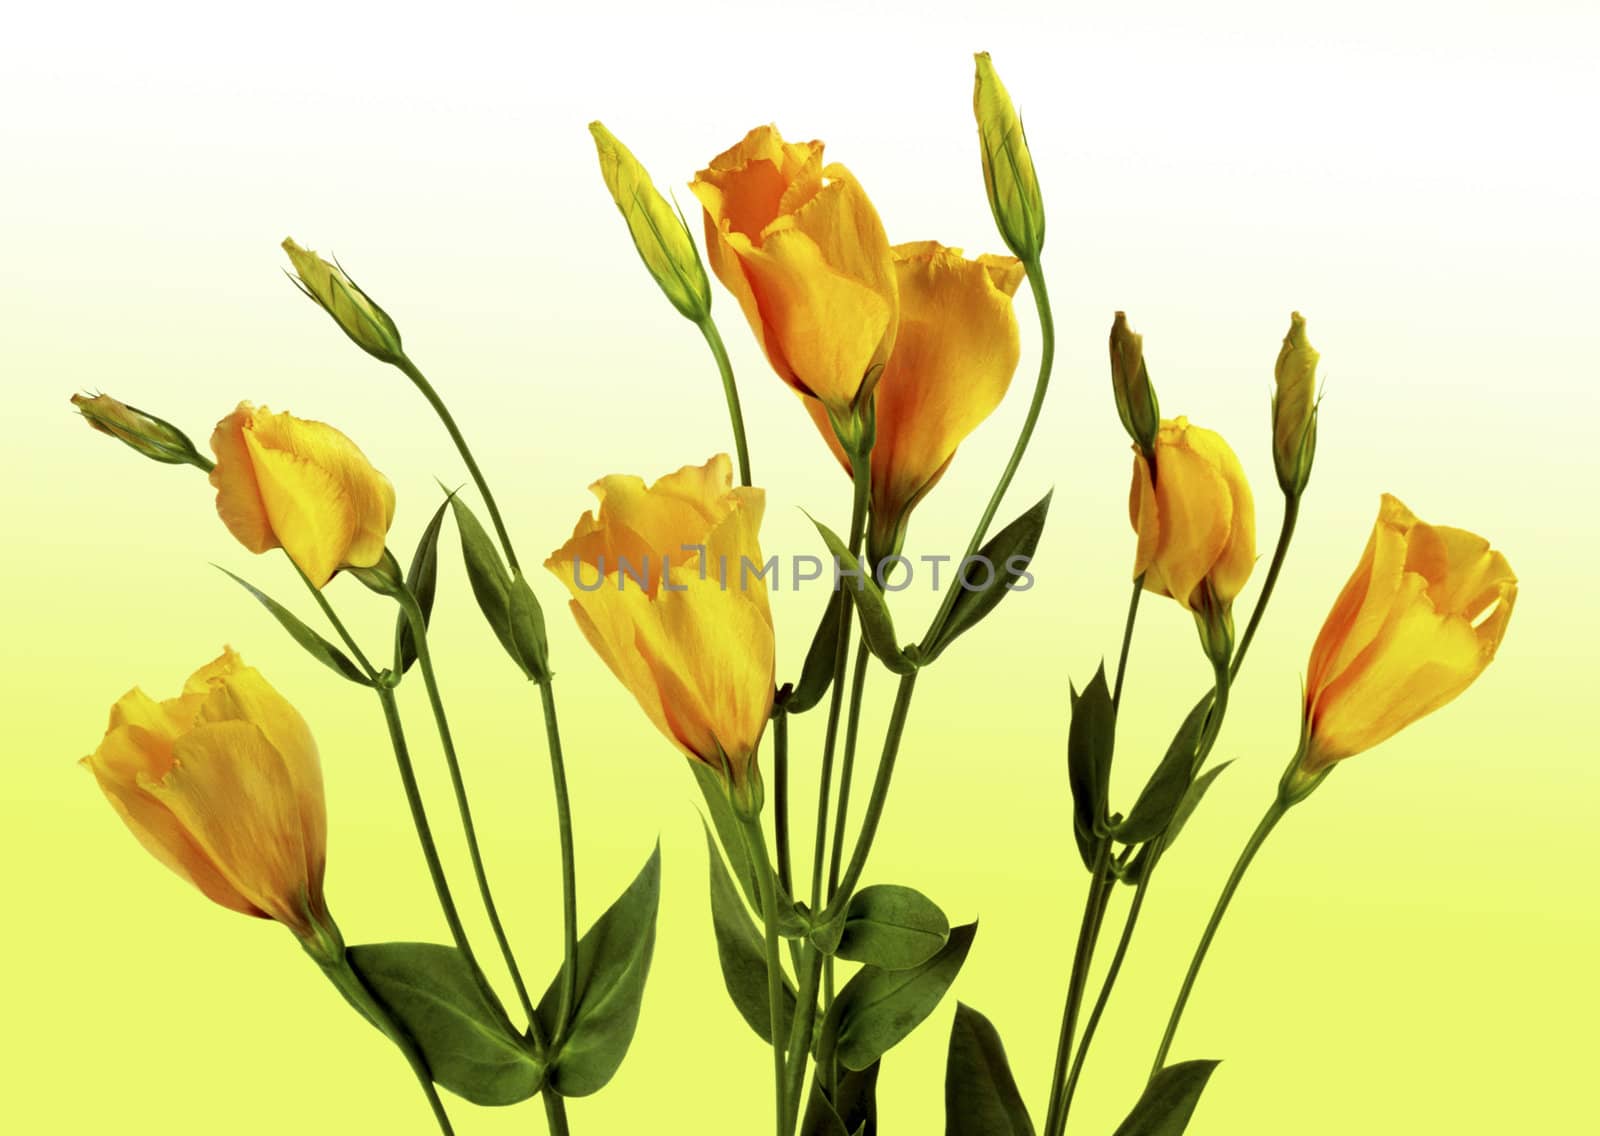 seven yellow crocus on faded background